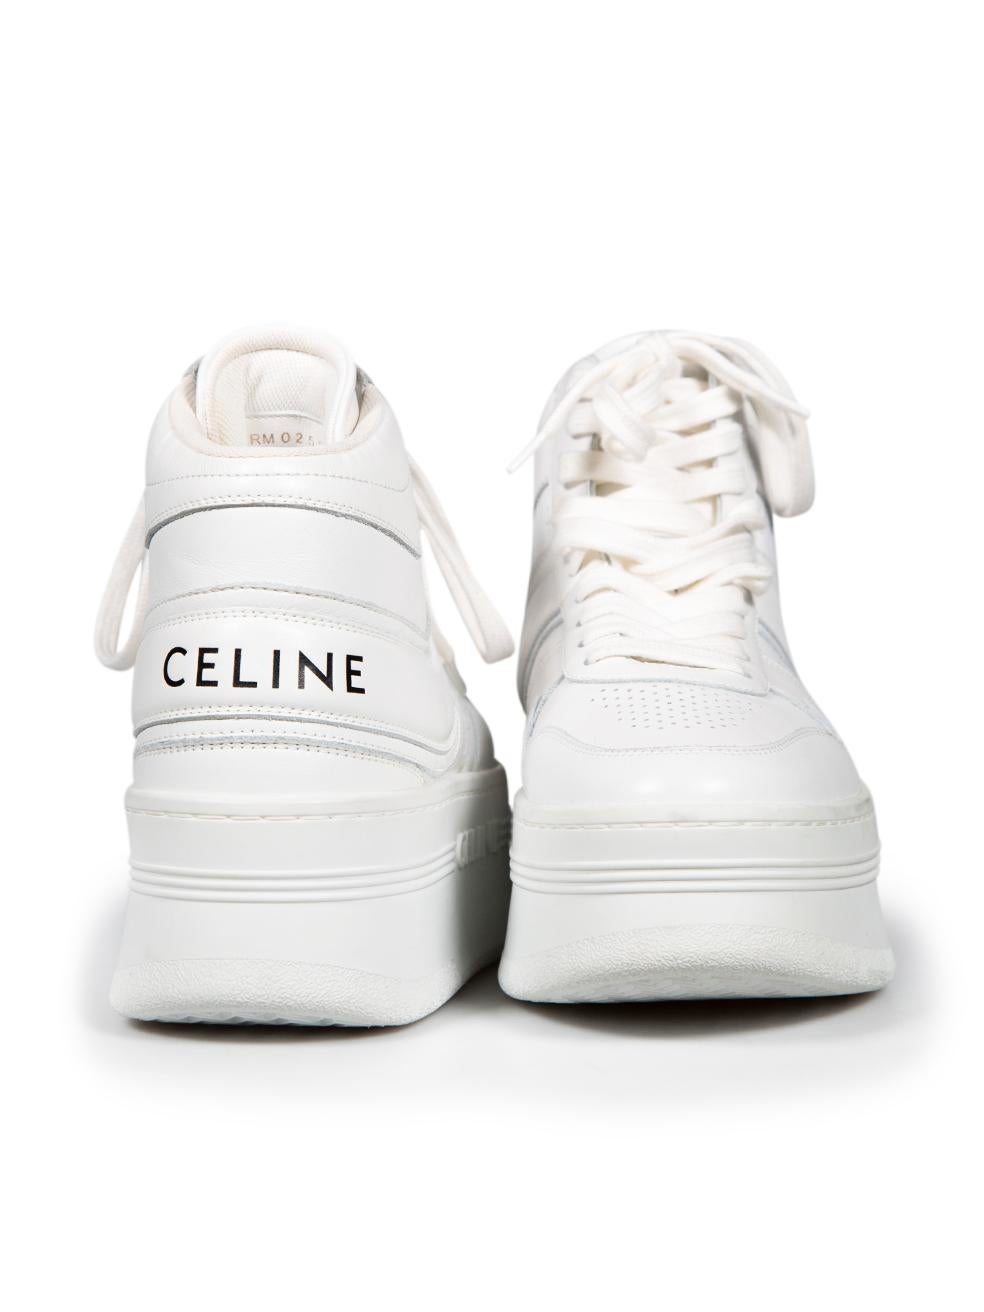 Céline White Leather High Top Platform Trainers Size IT 35 In Excellent Condition For Sale In London, GB